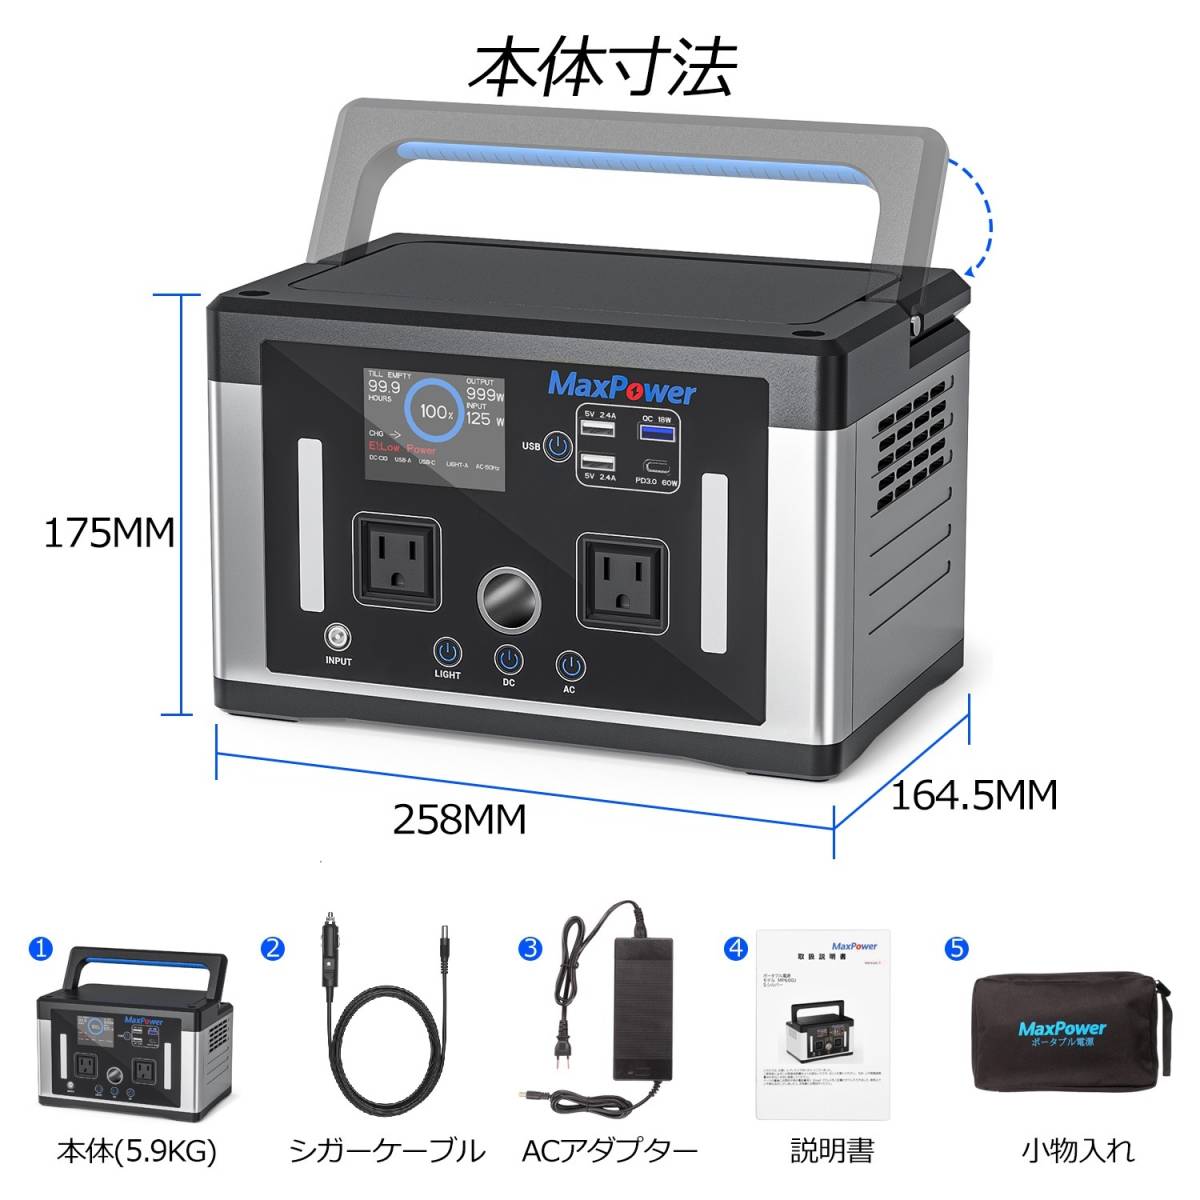 MaxPower Portal power supply MP700J AC700W 580wh super light weight model breaking the seal goods 